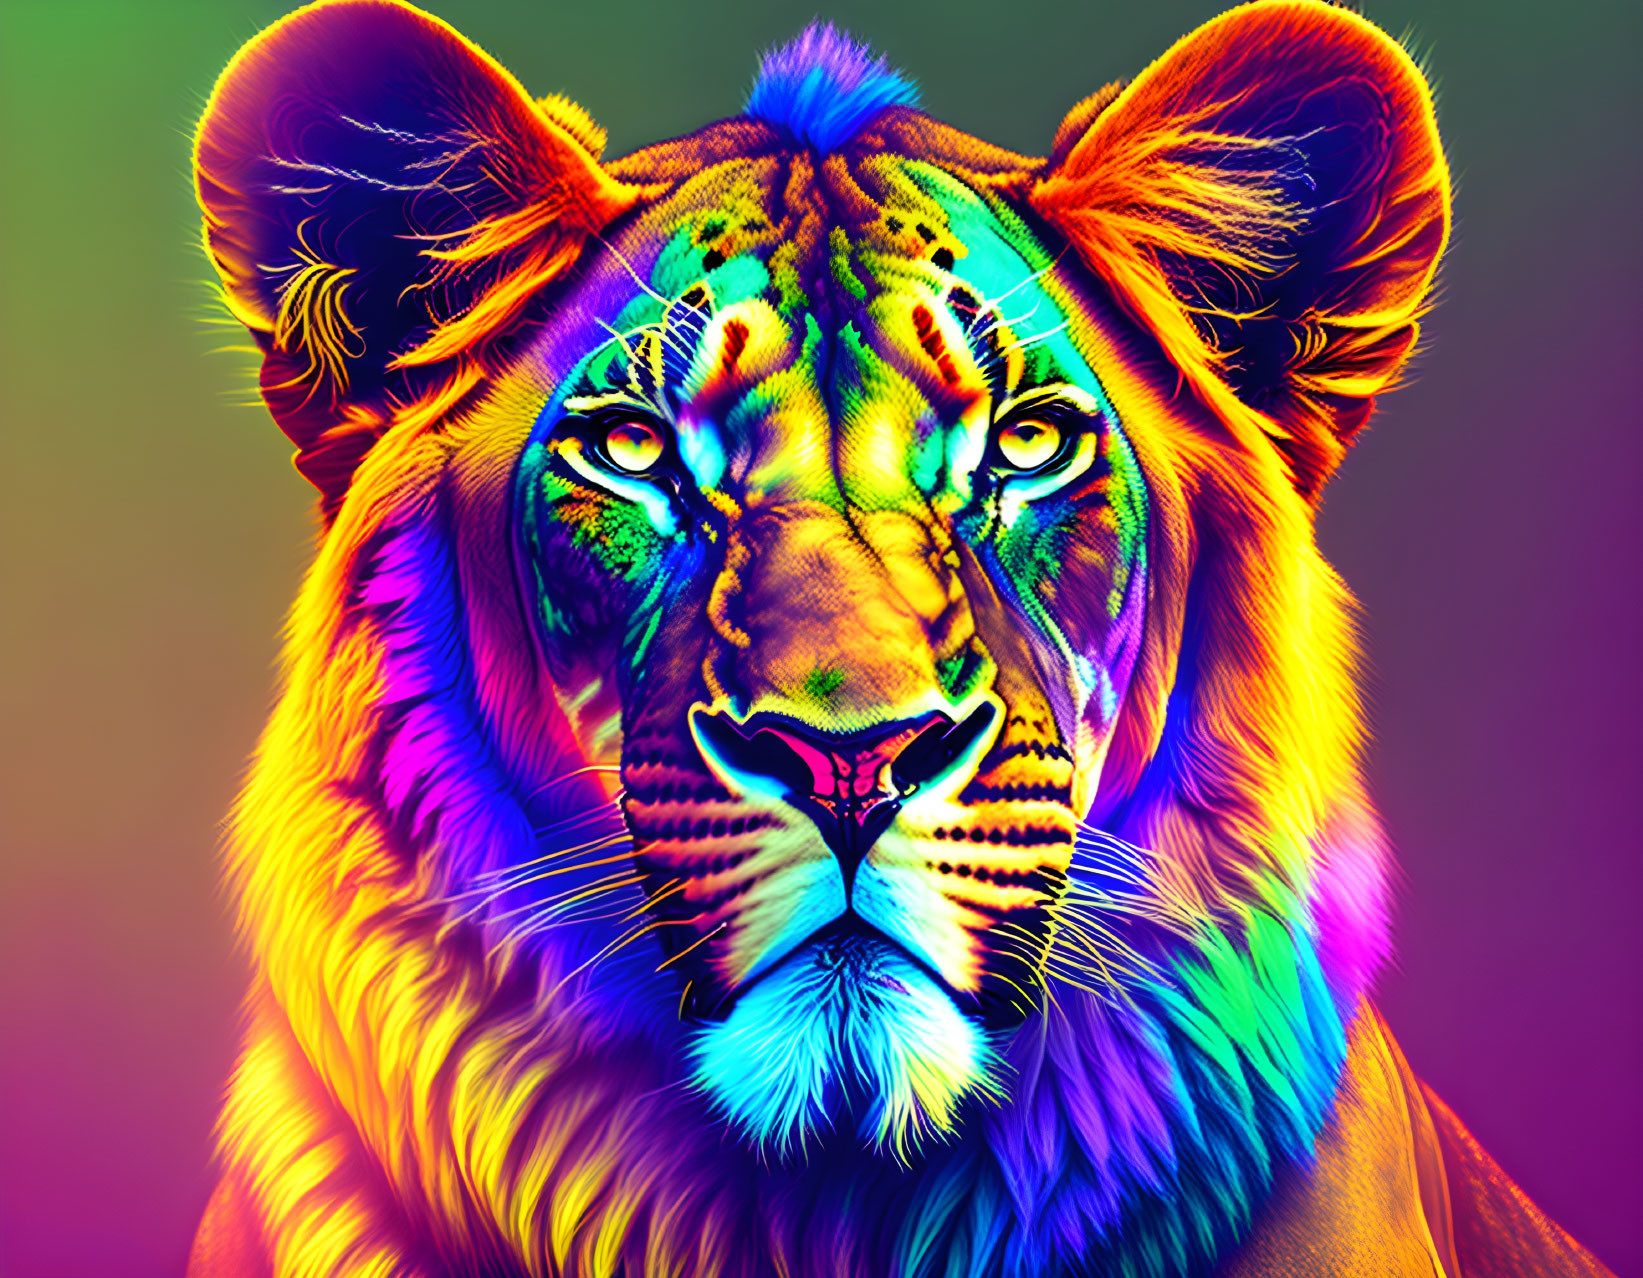 Colorful neon lion artwork on gradient background